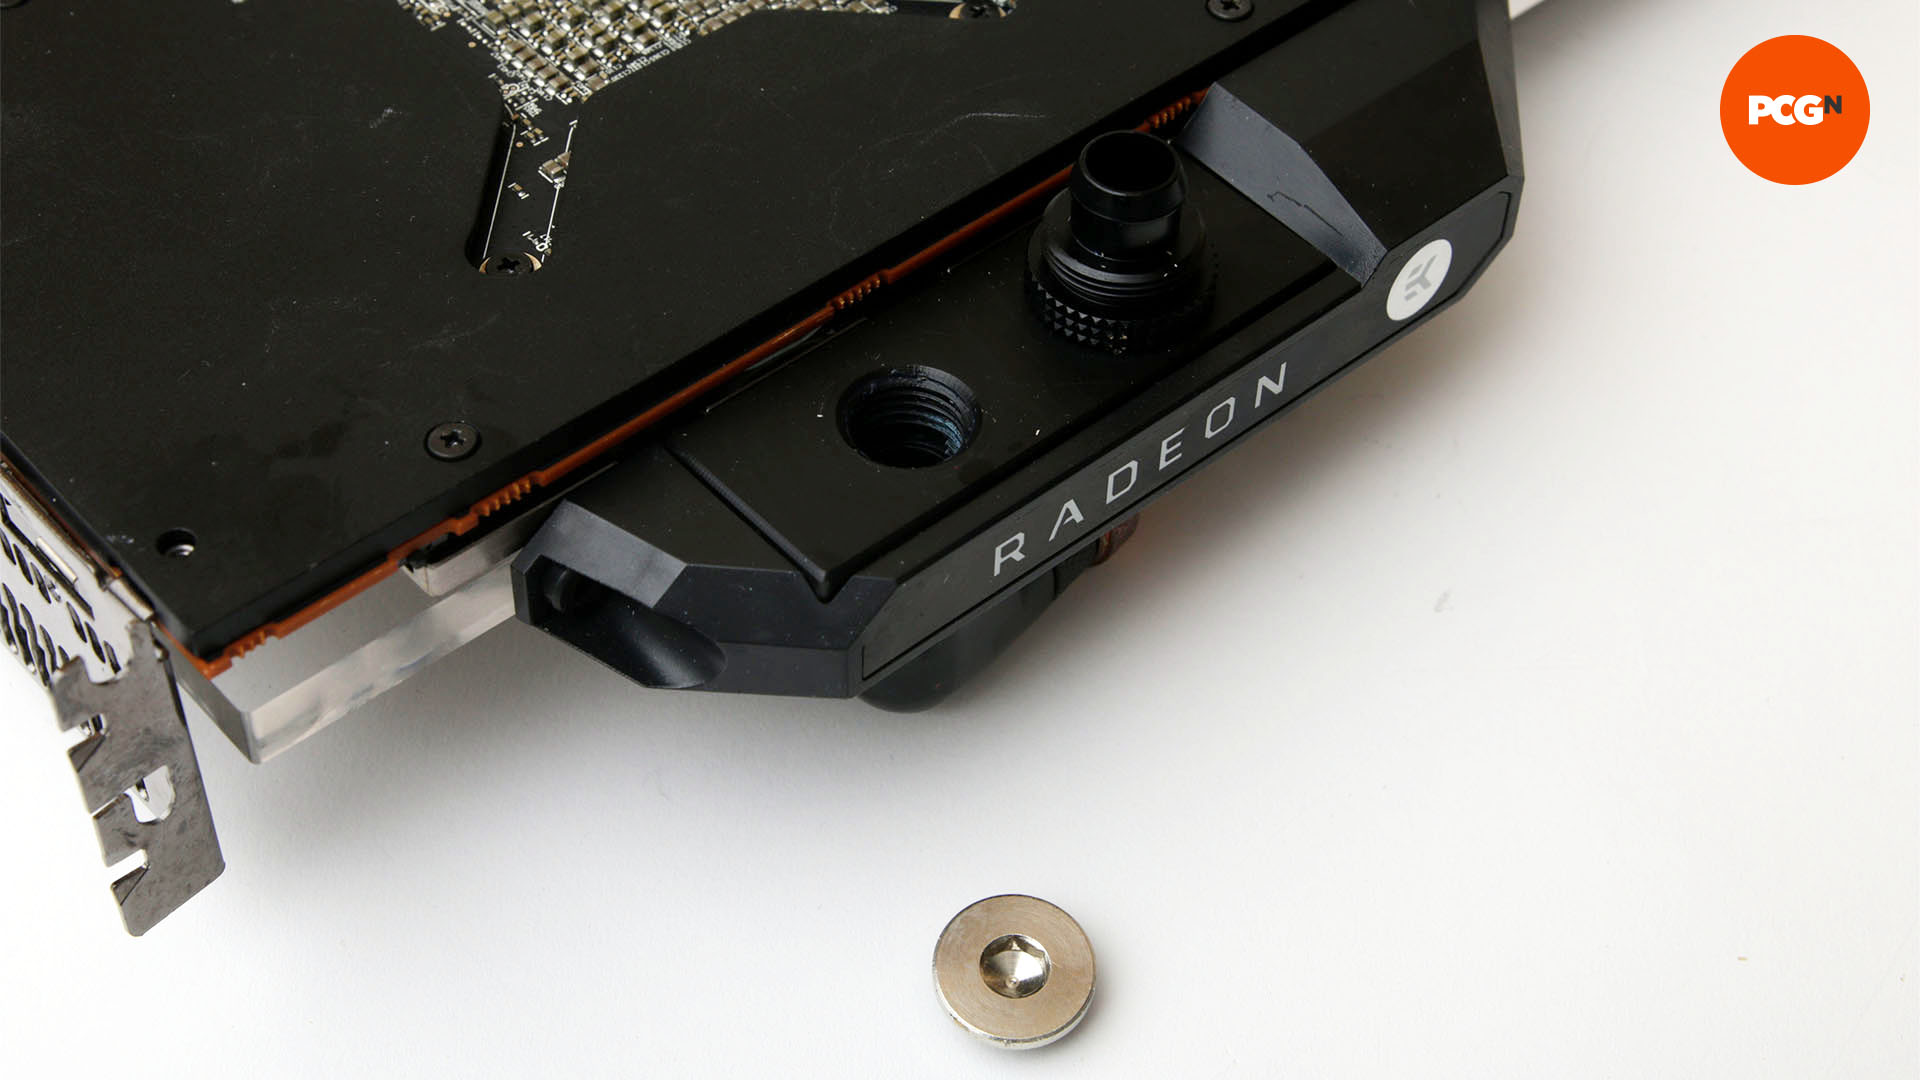 How to set fans and pumps to respond to coolant temp: Spare G1/4 port on EK Radeon waterblock